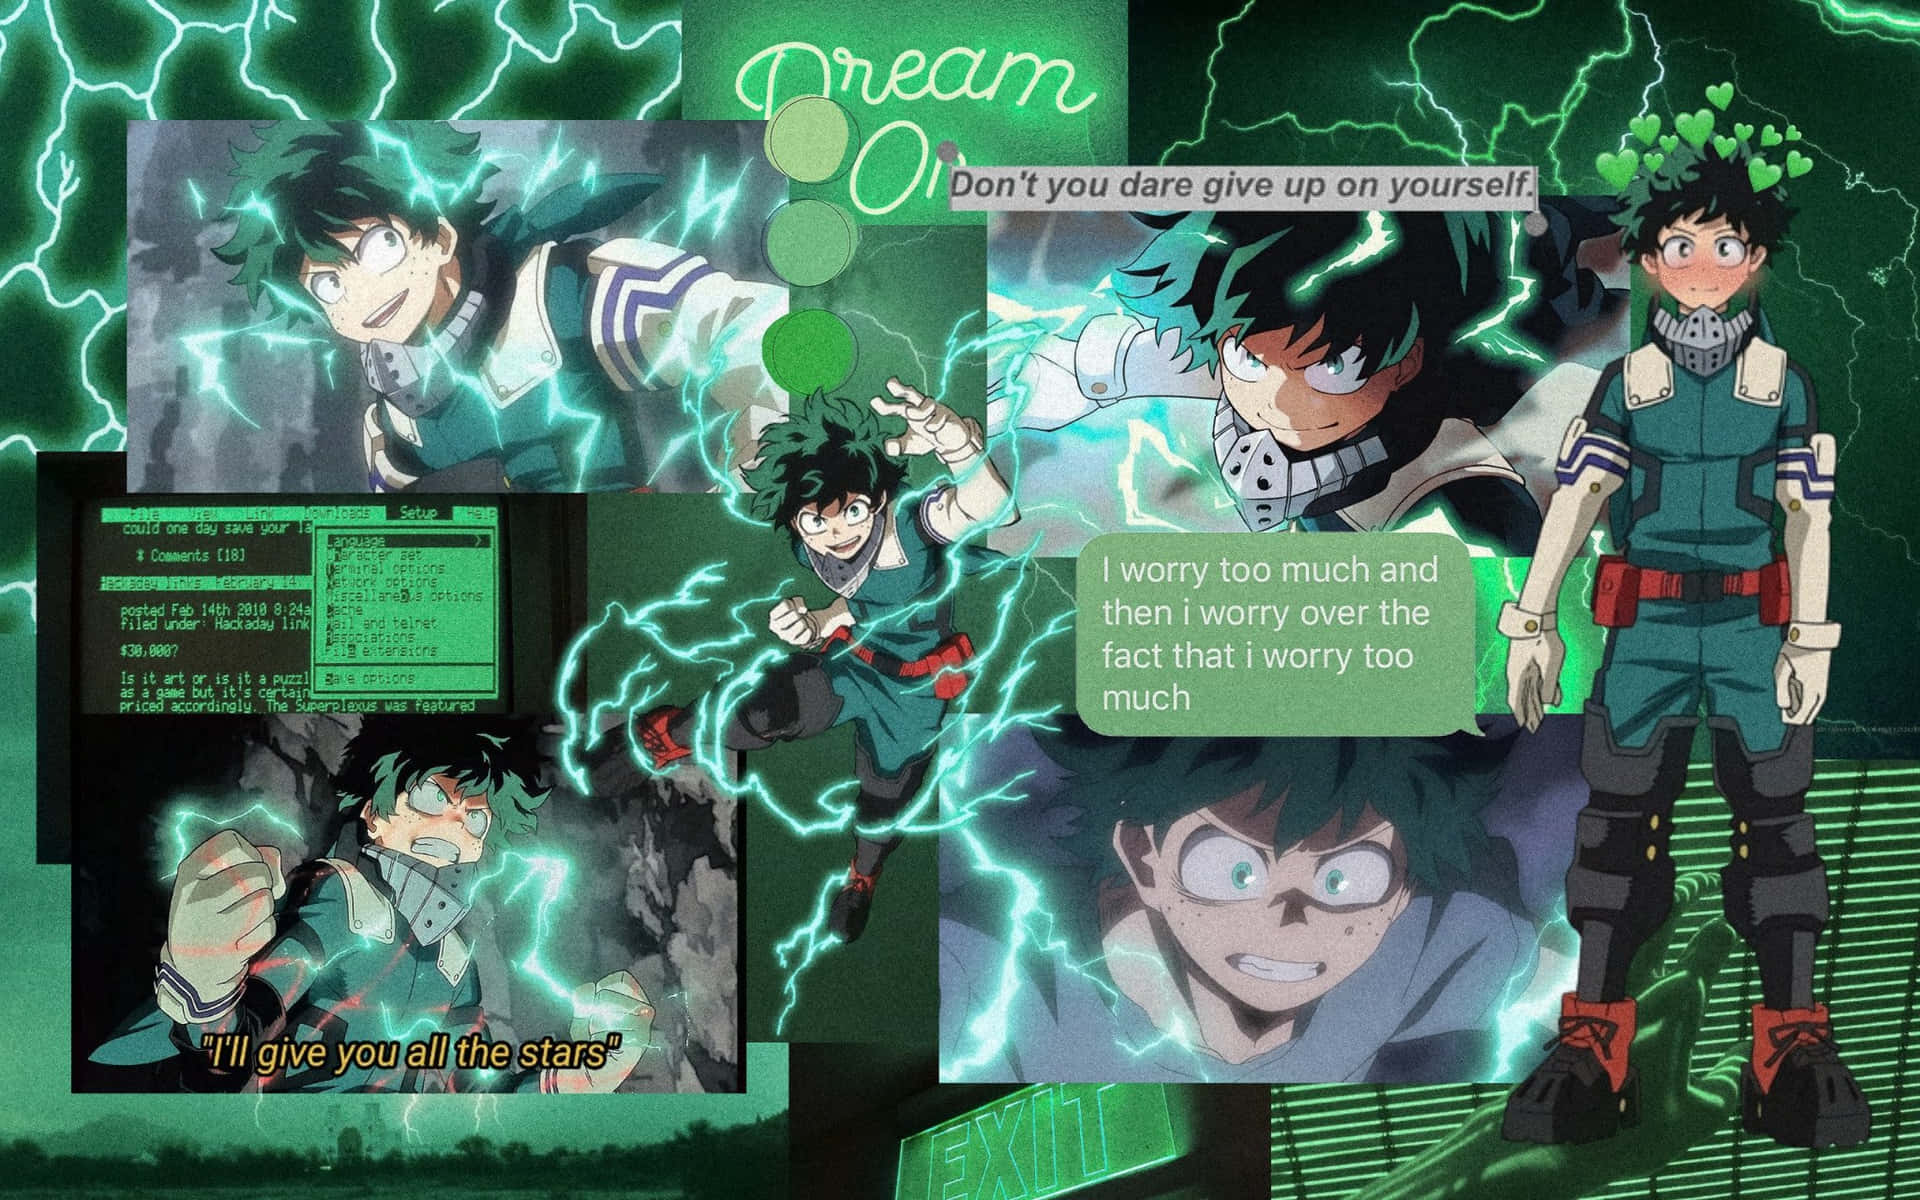 Collage of images of Midoriya from My Hero Academia, with a green aesthetic - Deku